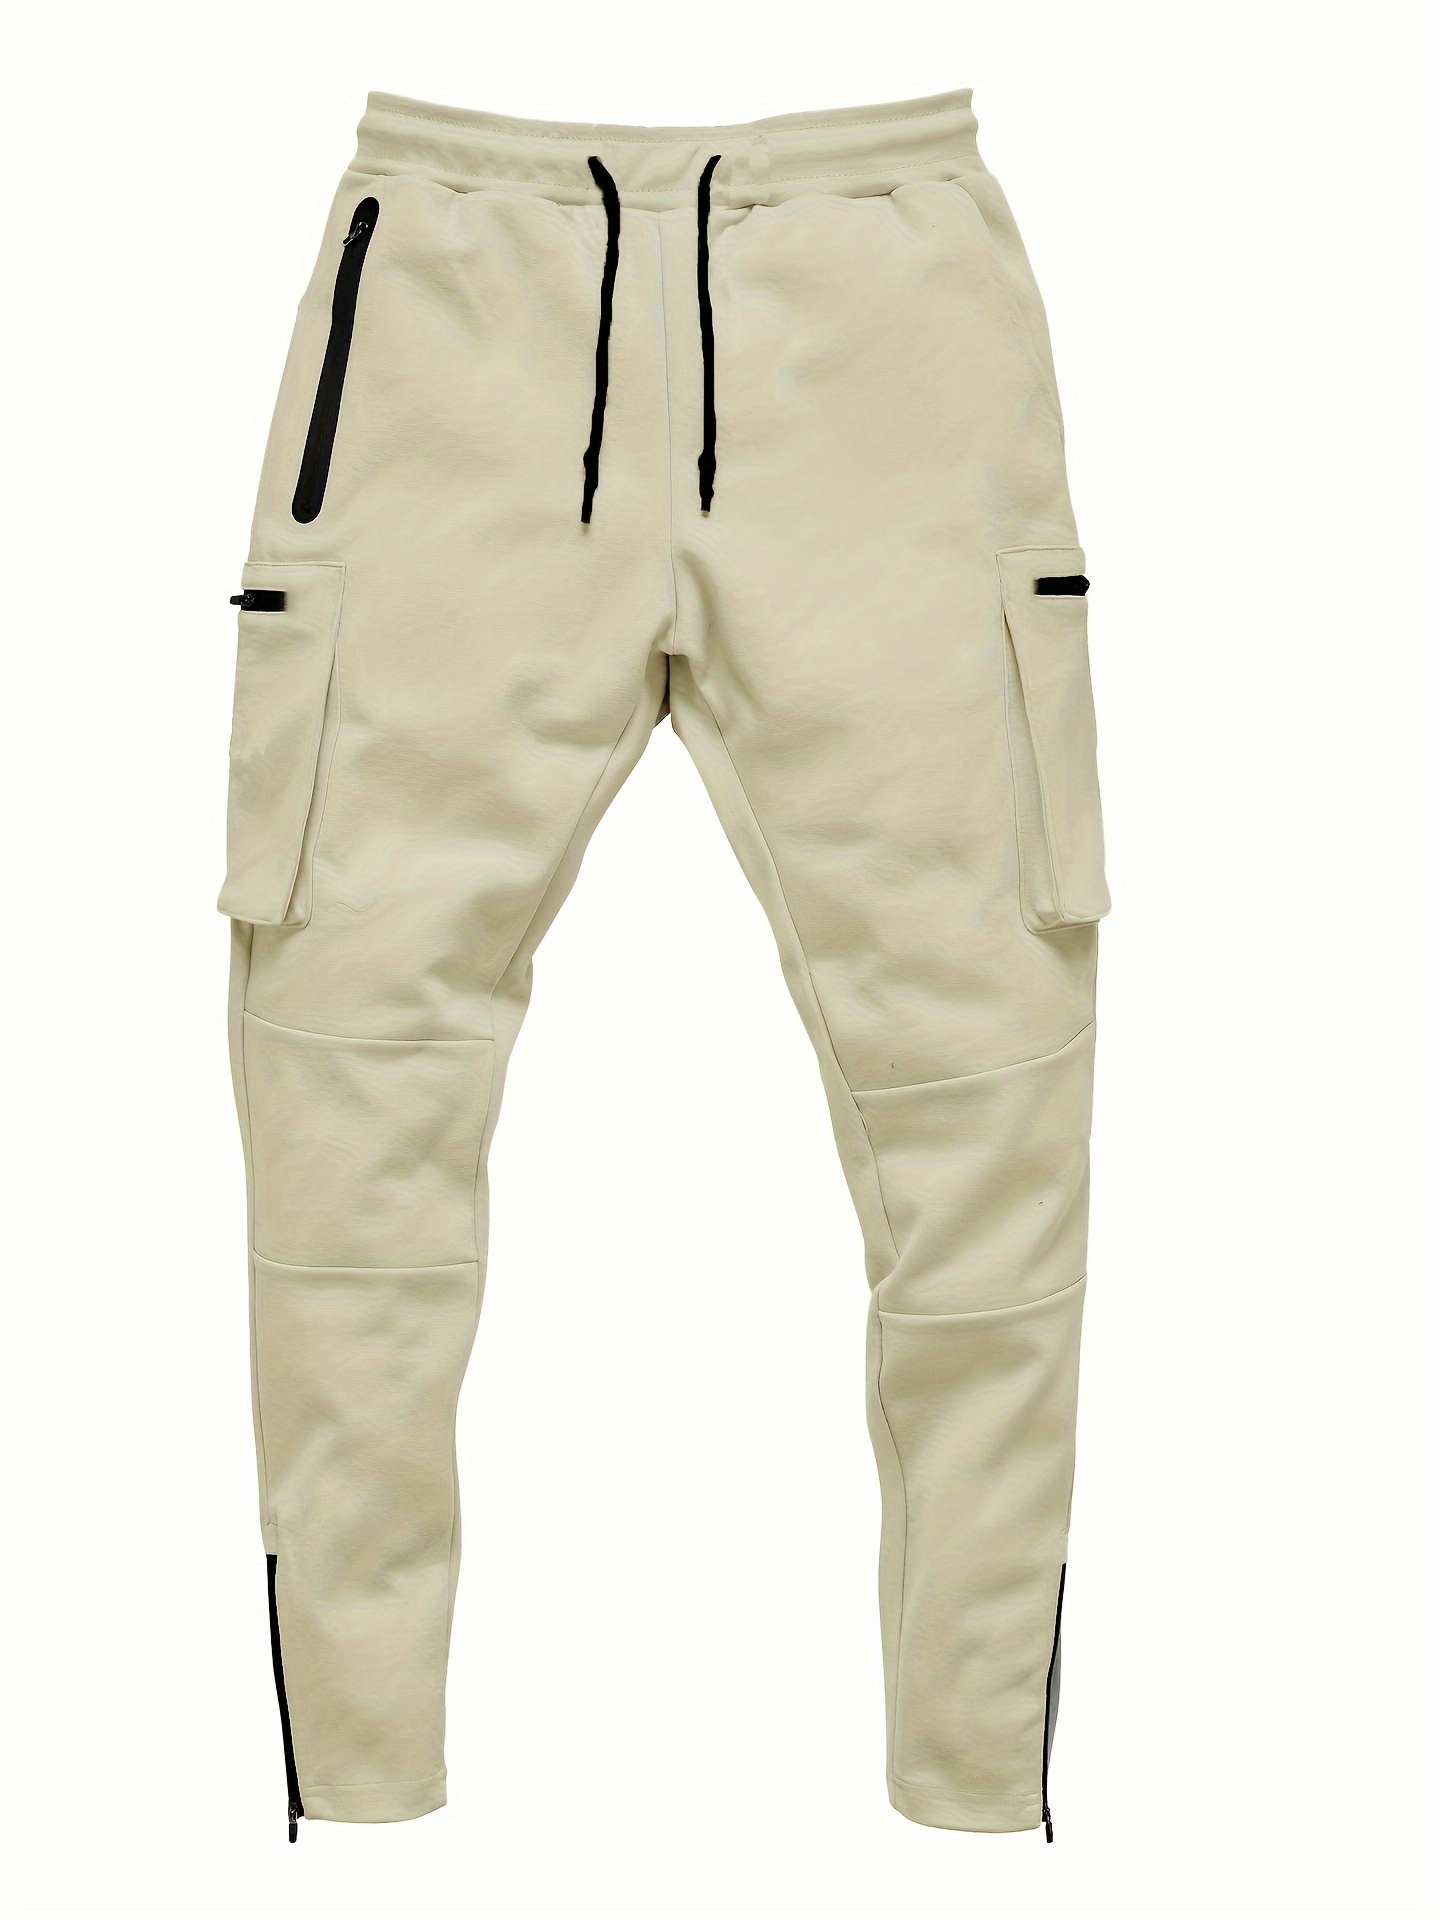 Buy SPORTIDO Joggers Track Pant for Mens with Side Pockets Stylish